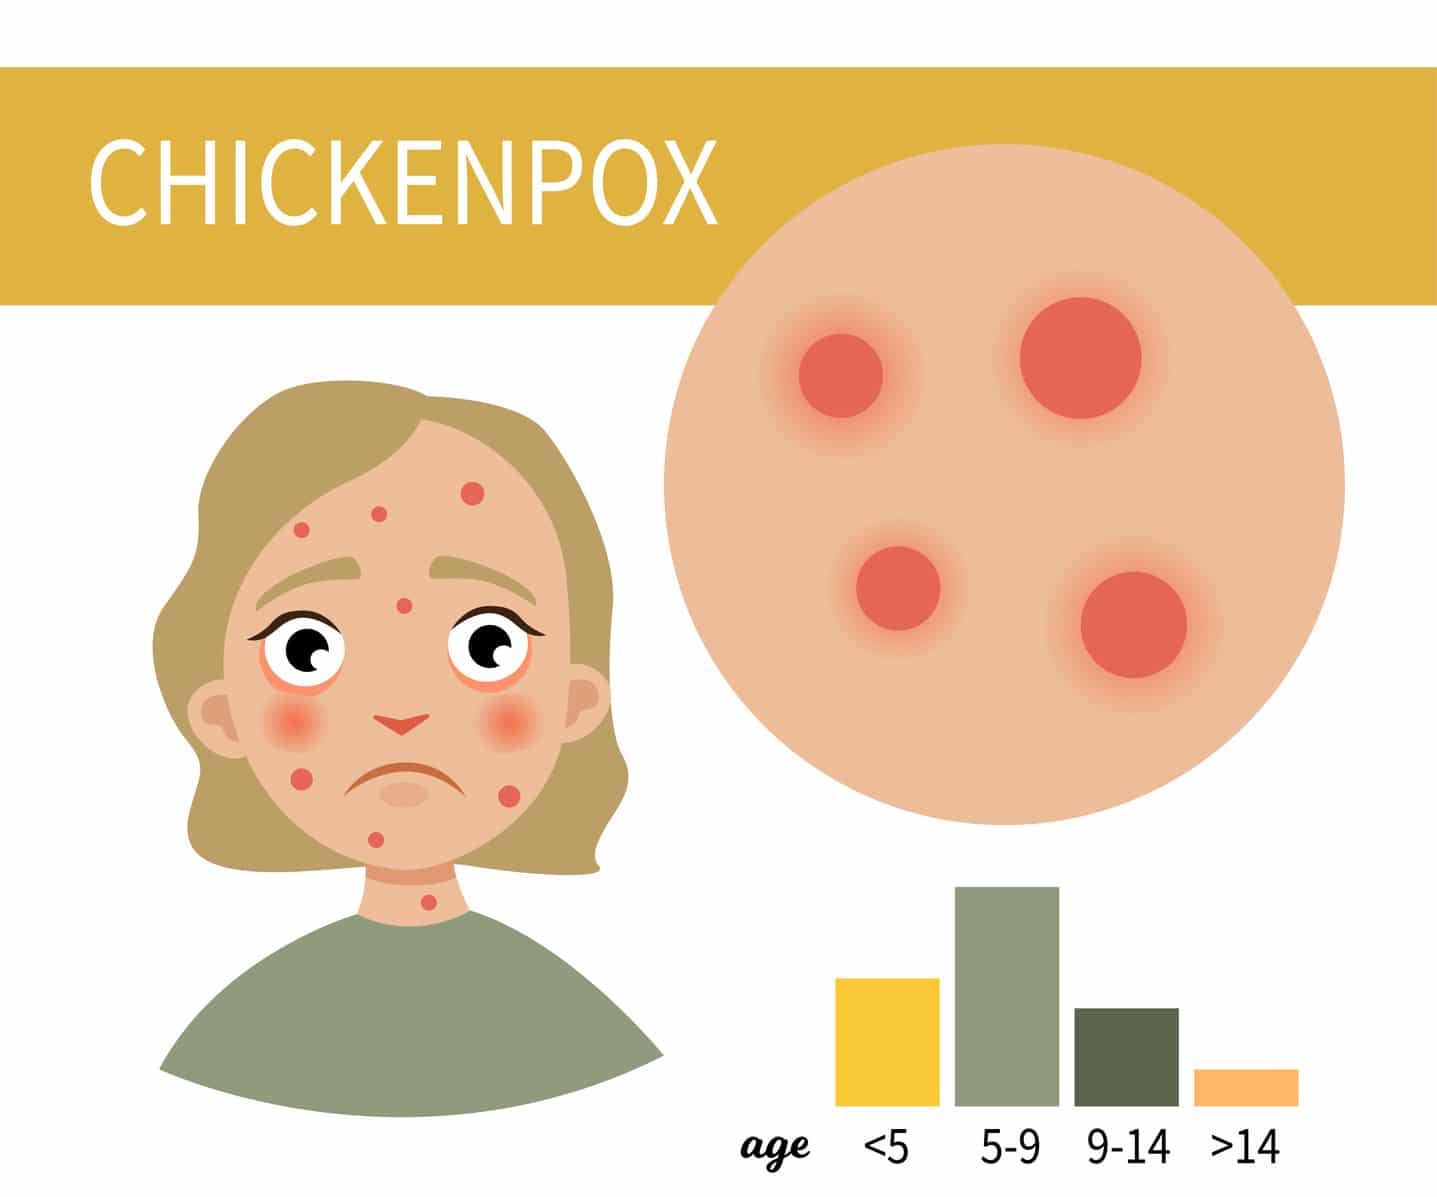 chickenpox is most common in children under the age of 14, especially children between the ages of 5-9.